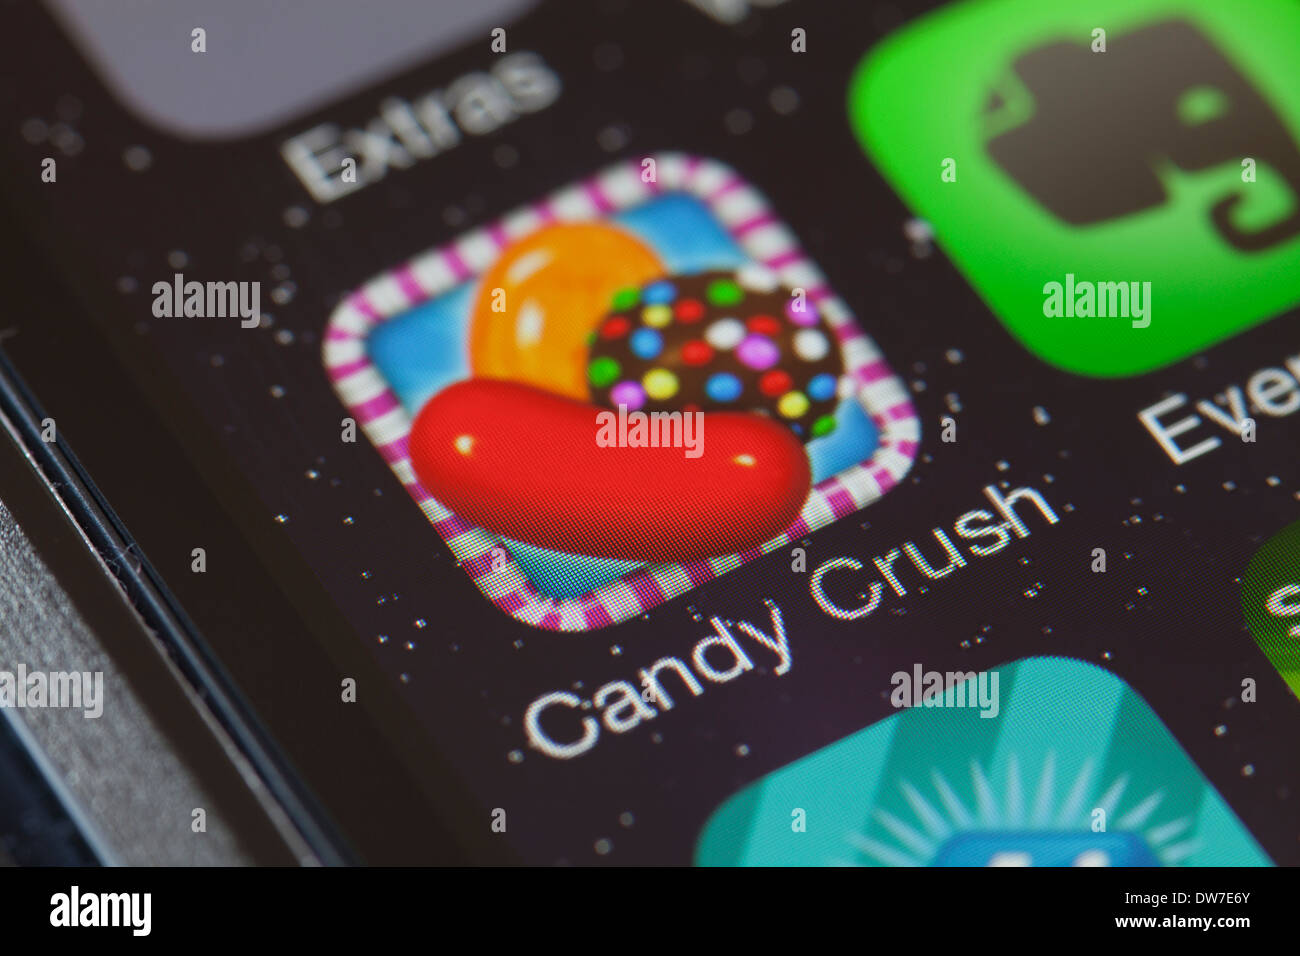 candy crush online entertainment Stock Photo - Alamy